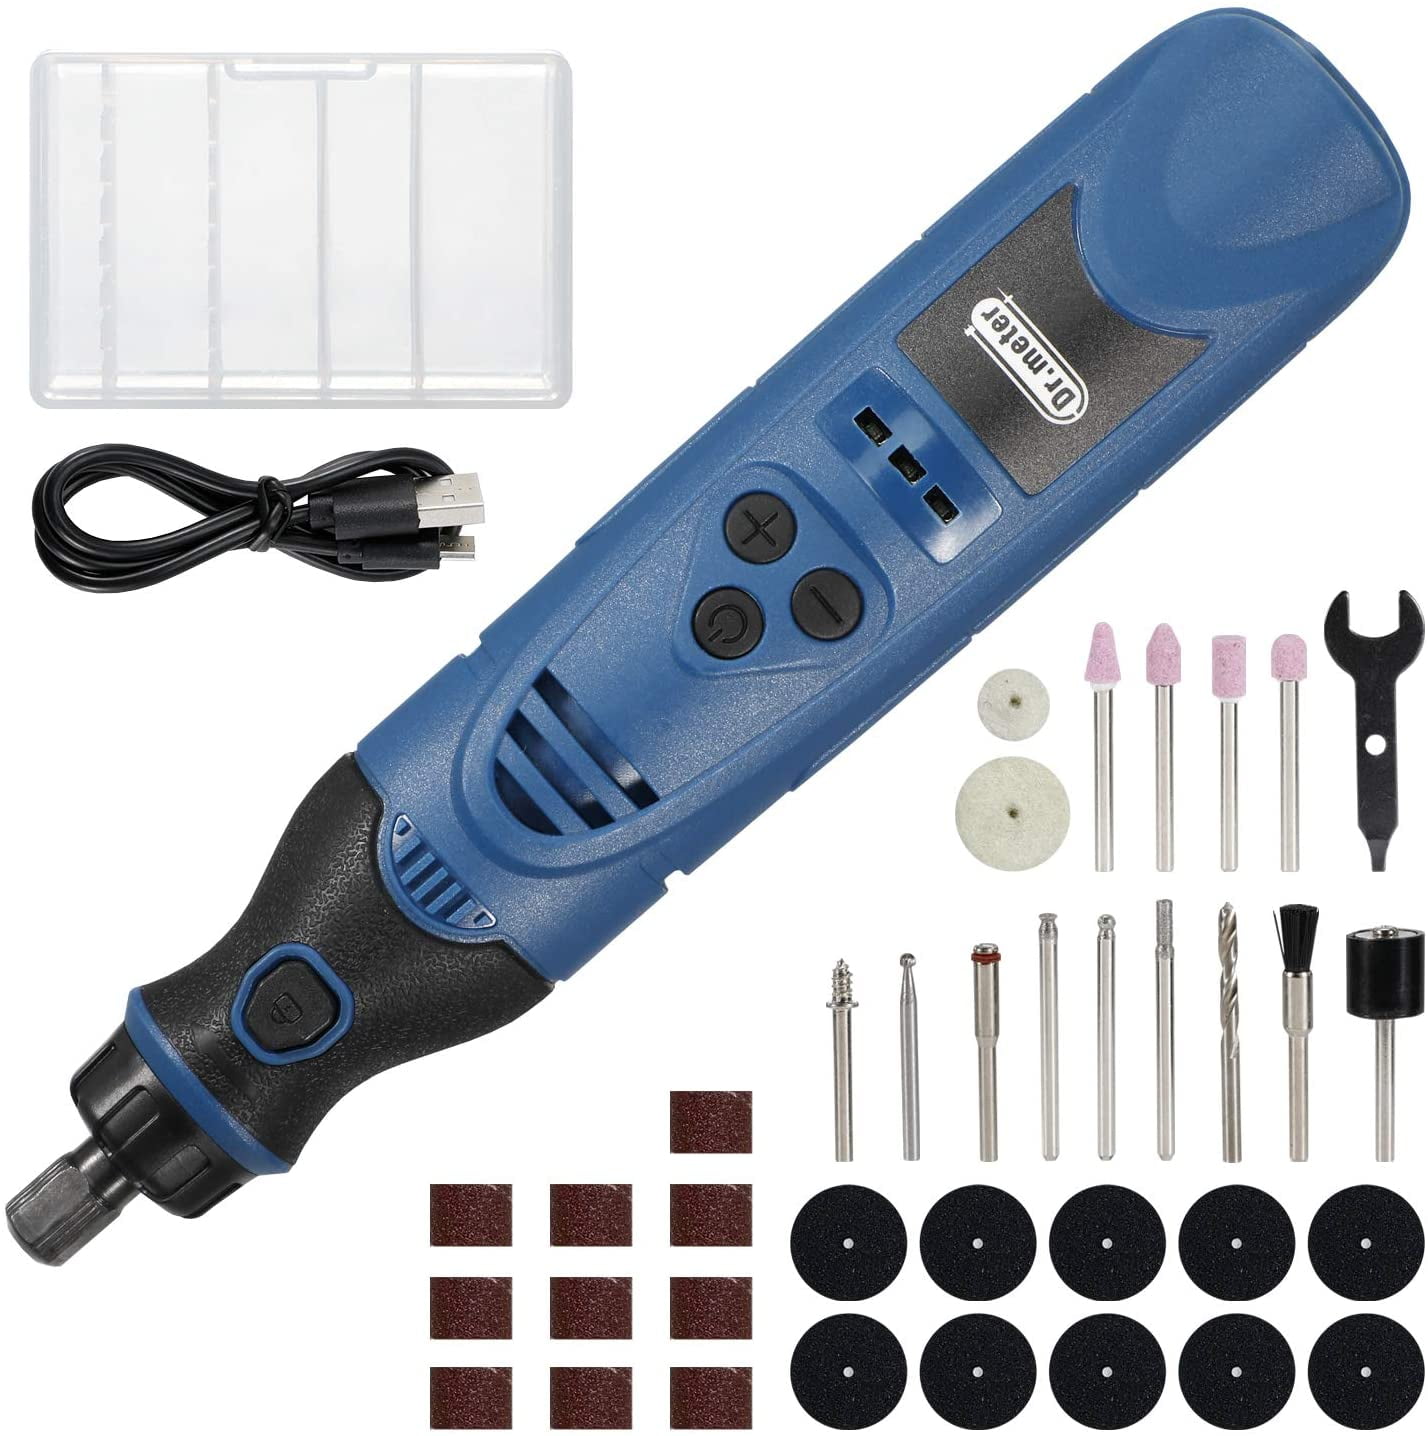 Sanding Grinding Polishing and More! 3.6V Cordless Rotary 60 Piece Tool Set Trimming 